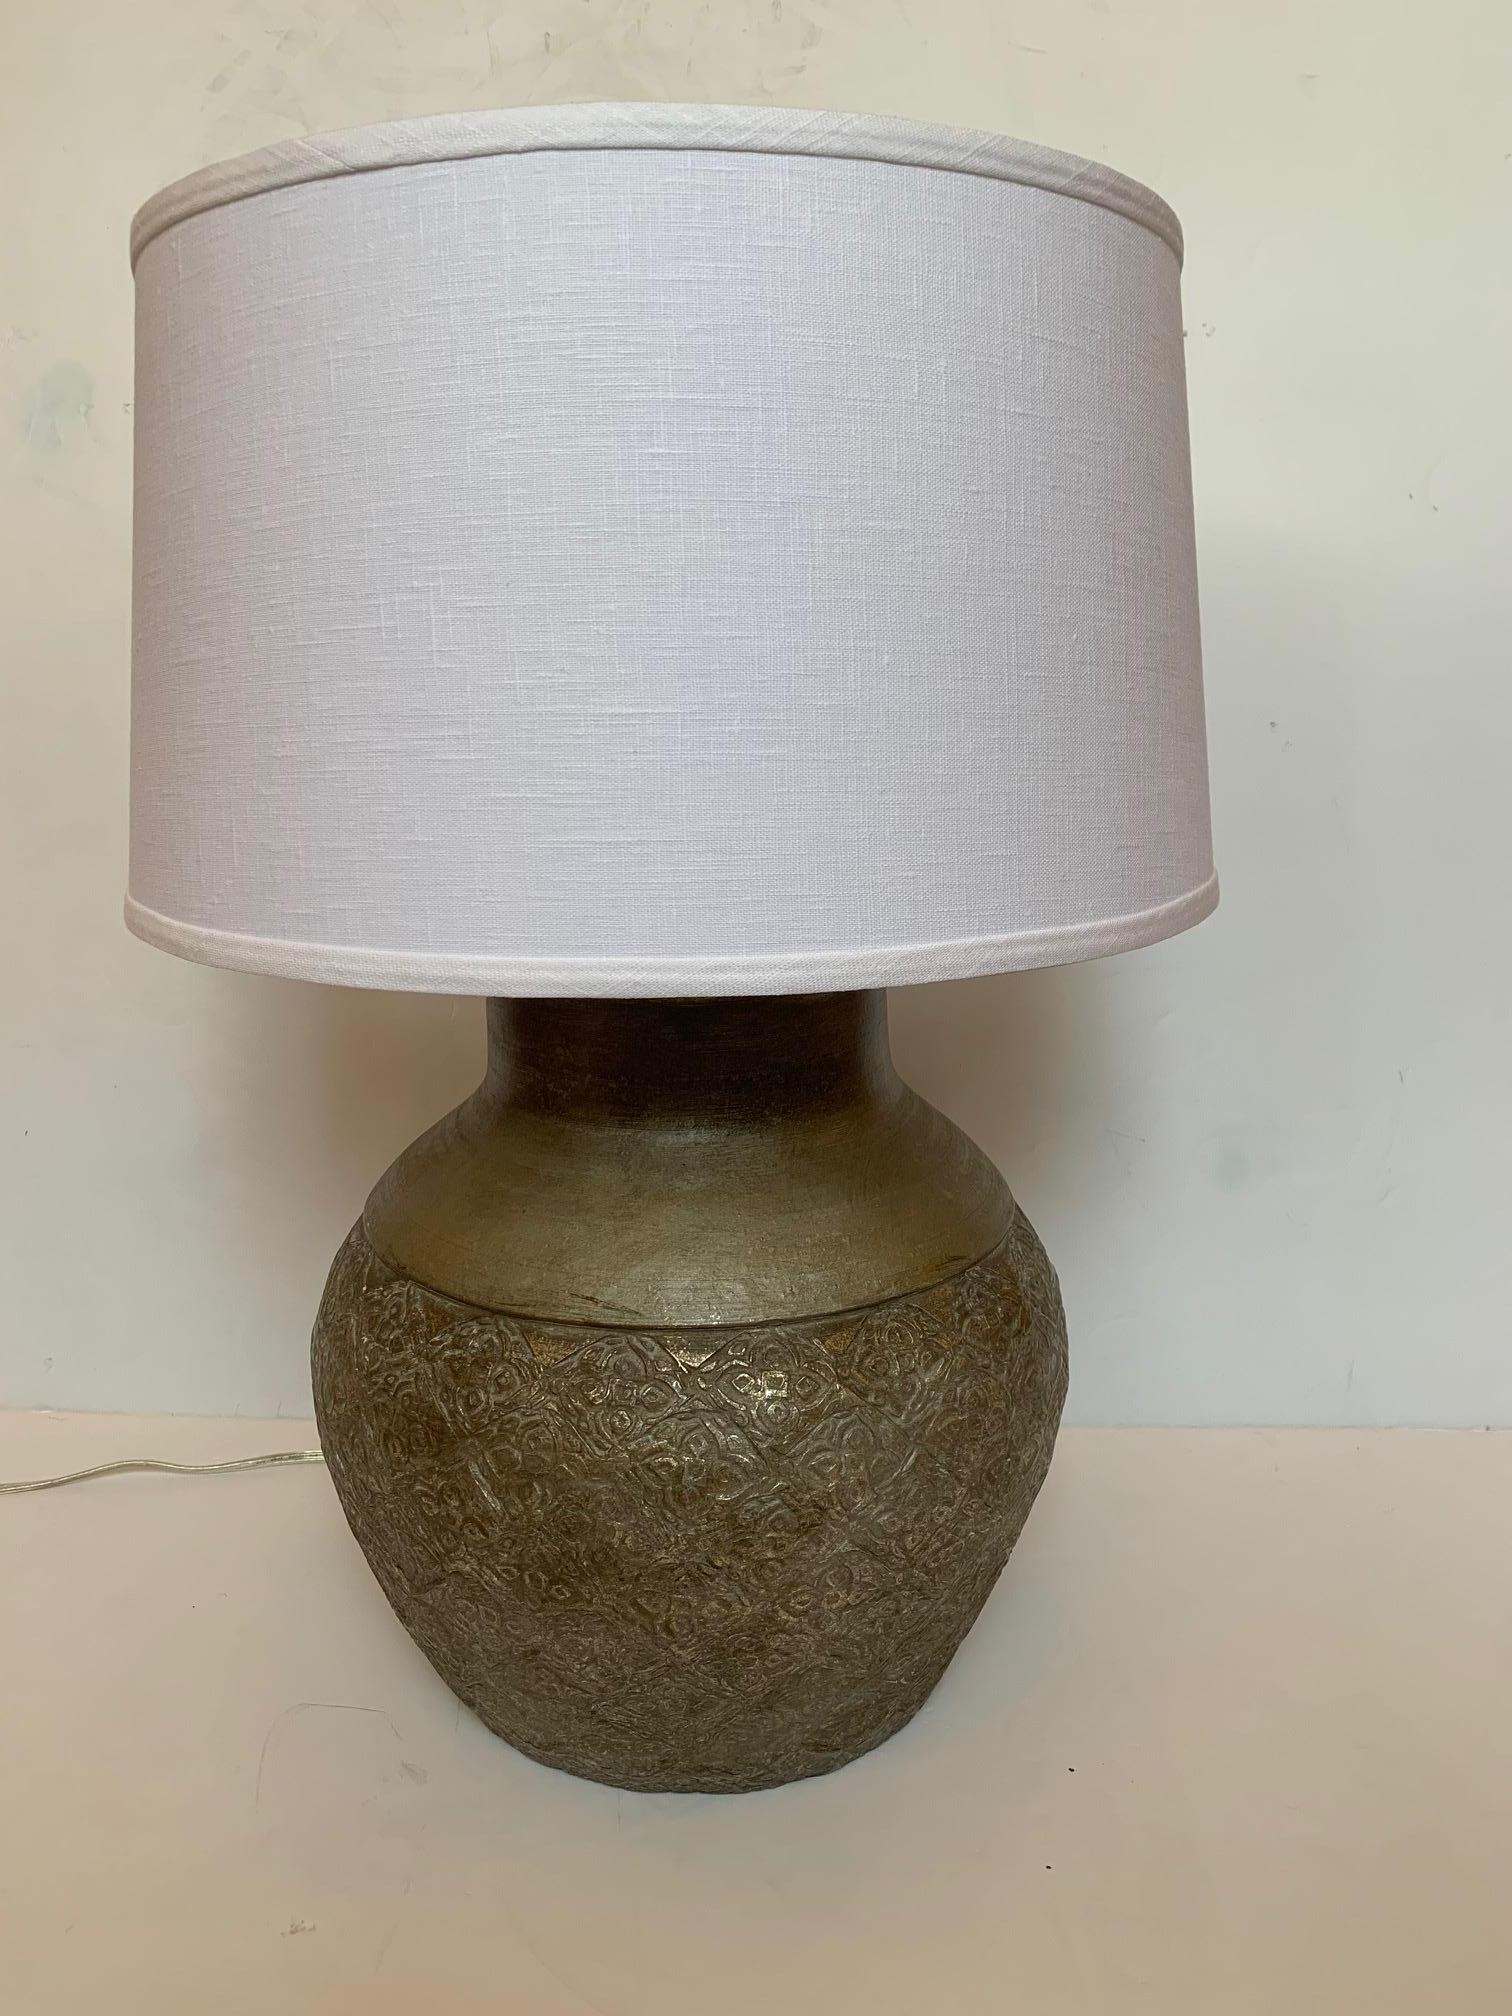 Great looking large neutral vintage table lamp having embossed metal round base and new canvas shade.
Base is 16